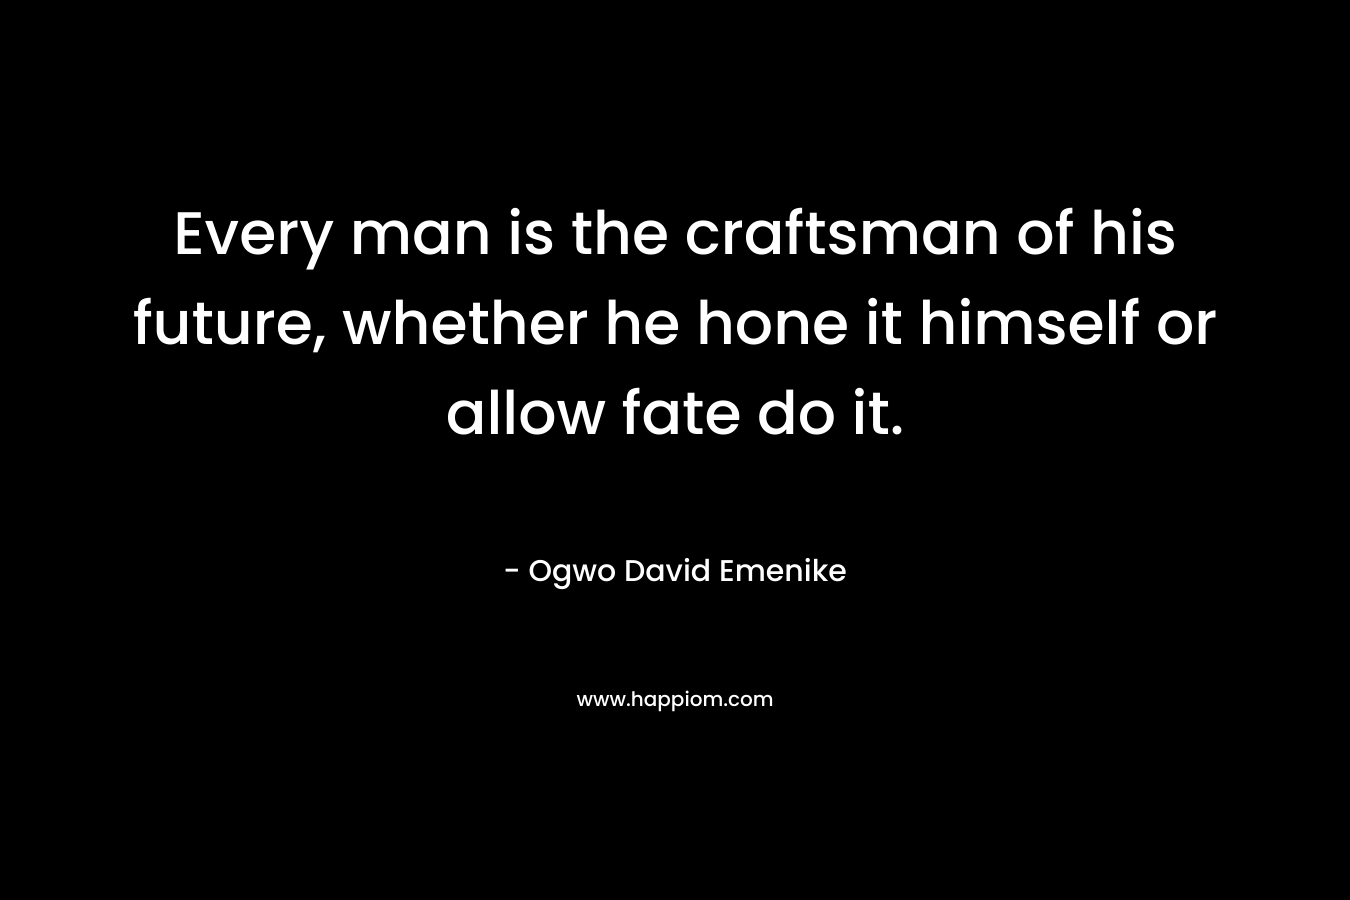 Every man is the craftsman of his future, whether he hone it himself or allow fate do it.